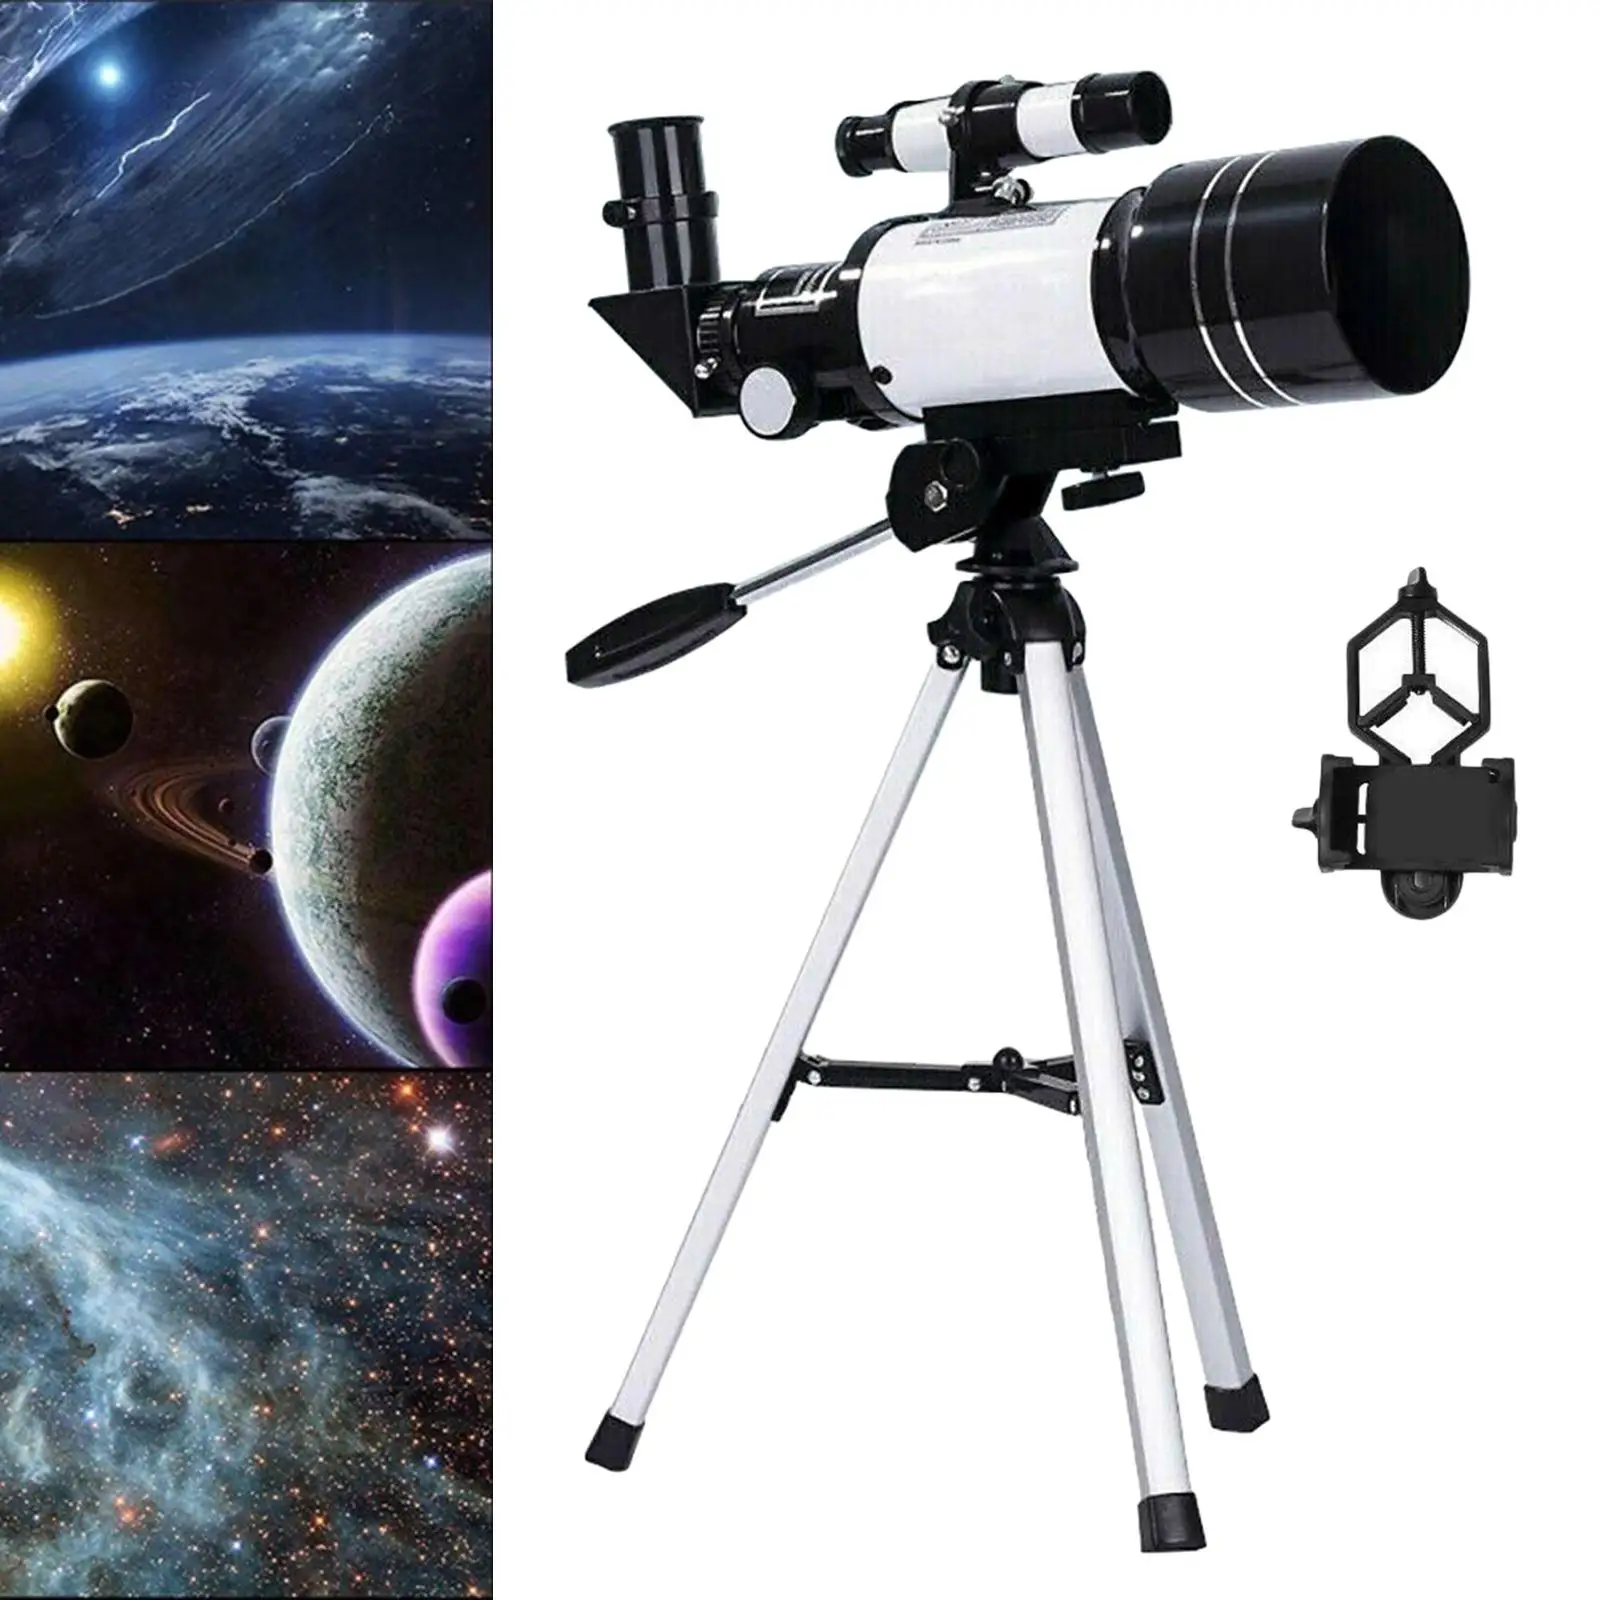 Portable 70 Astronomical Reflector Telescope Set with Tripod for Kids Beginners